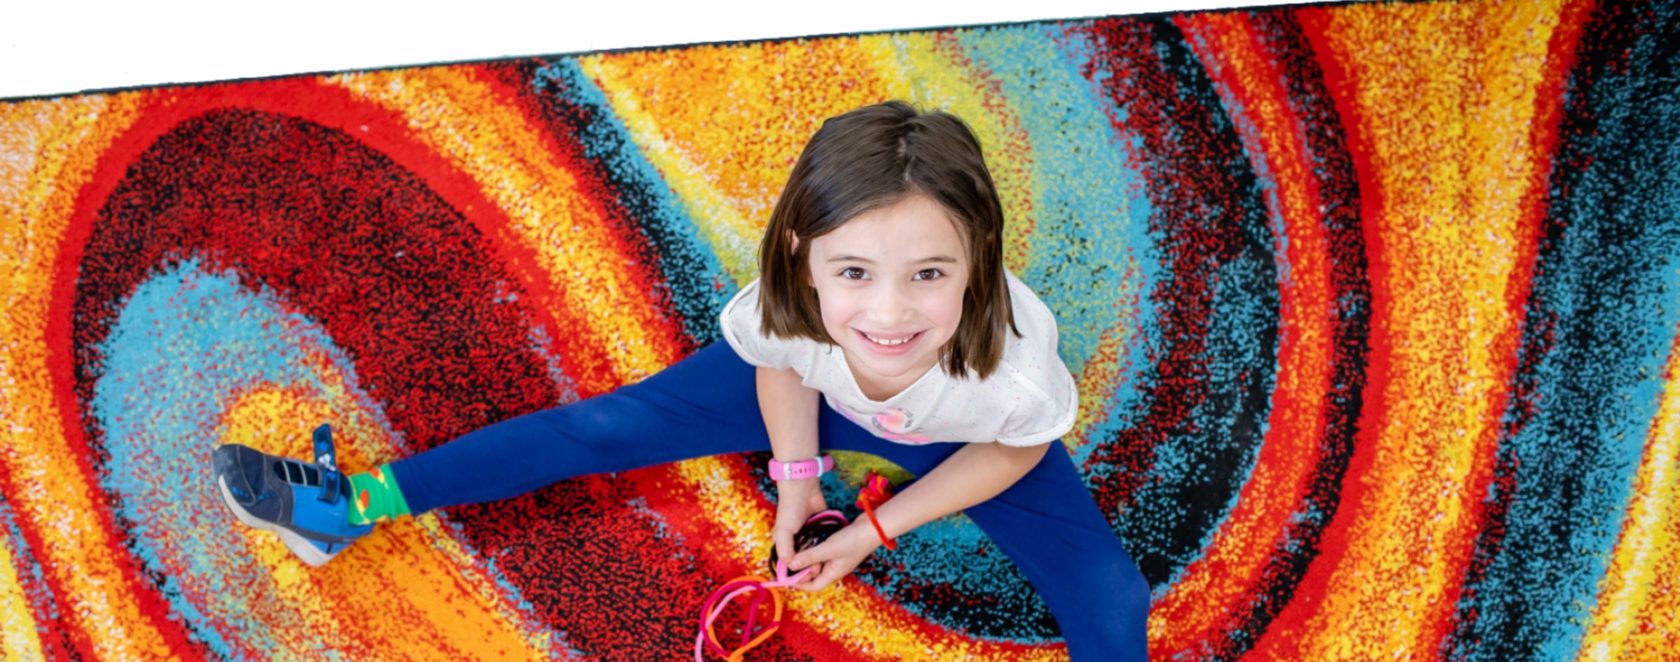 A student sitting on a colorful rug smiling and looking up at the camera.